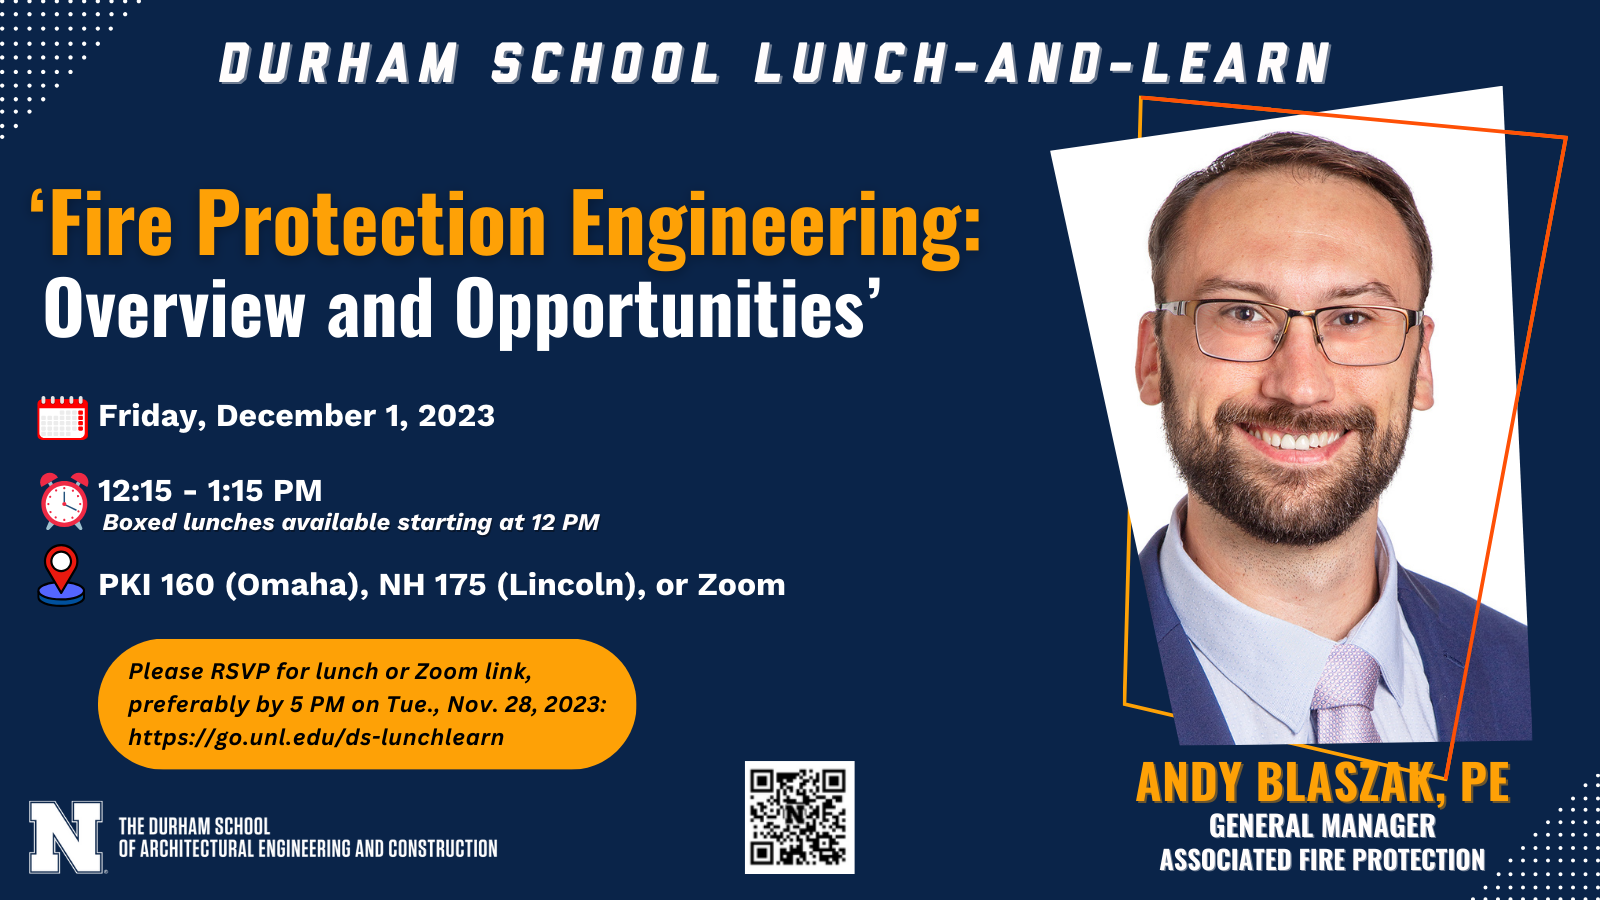 Andy Blaszak will speak at Friday's Durham School Lunc-and-Learn session.